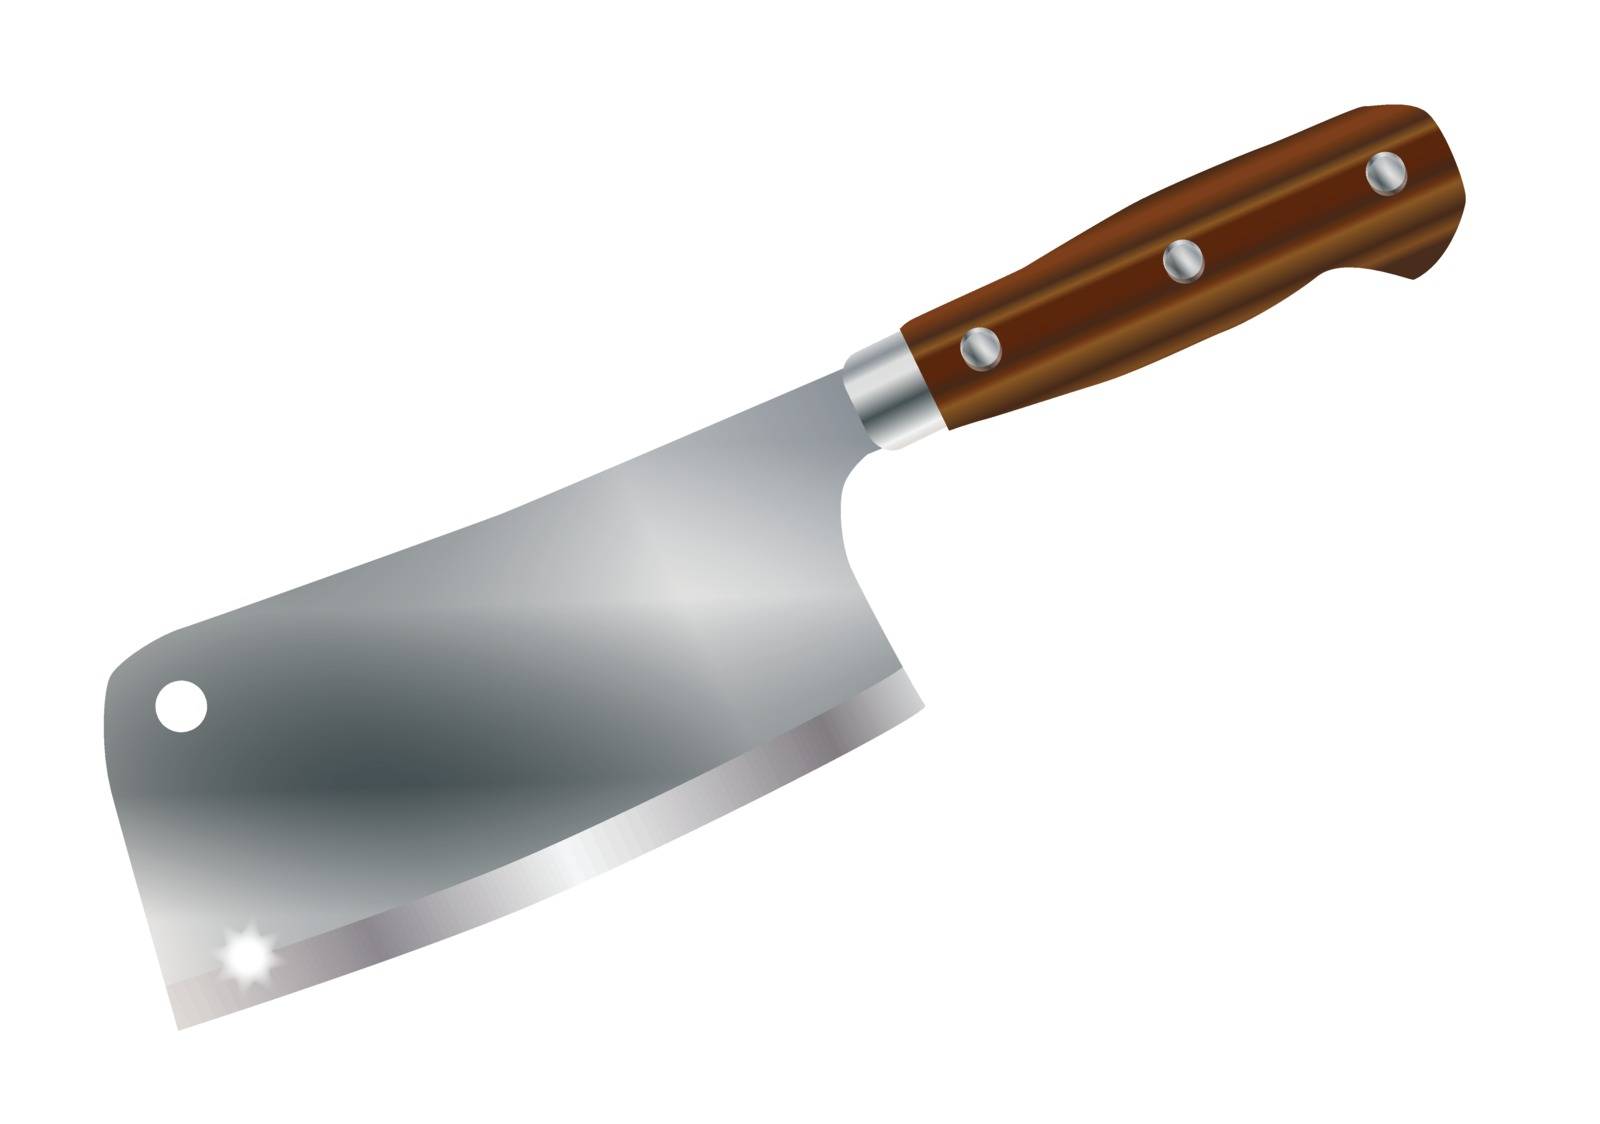 A typical generic butchers meat cleaver over a white background